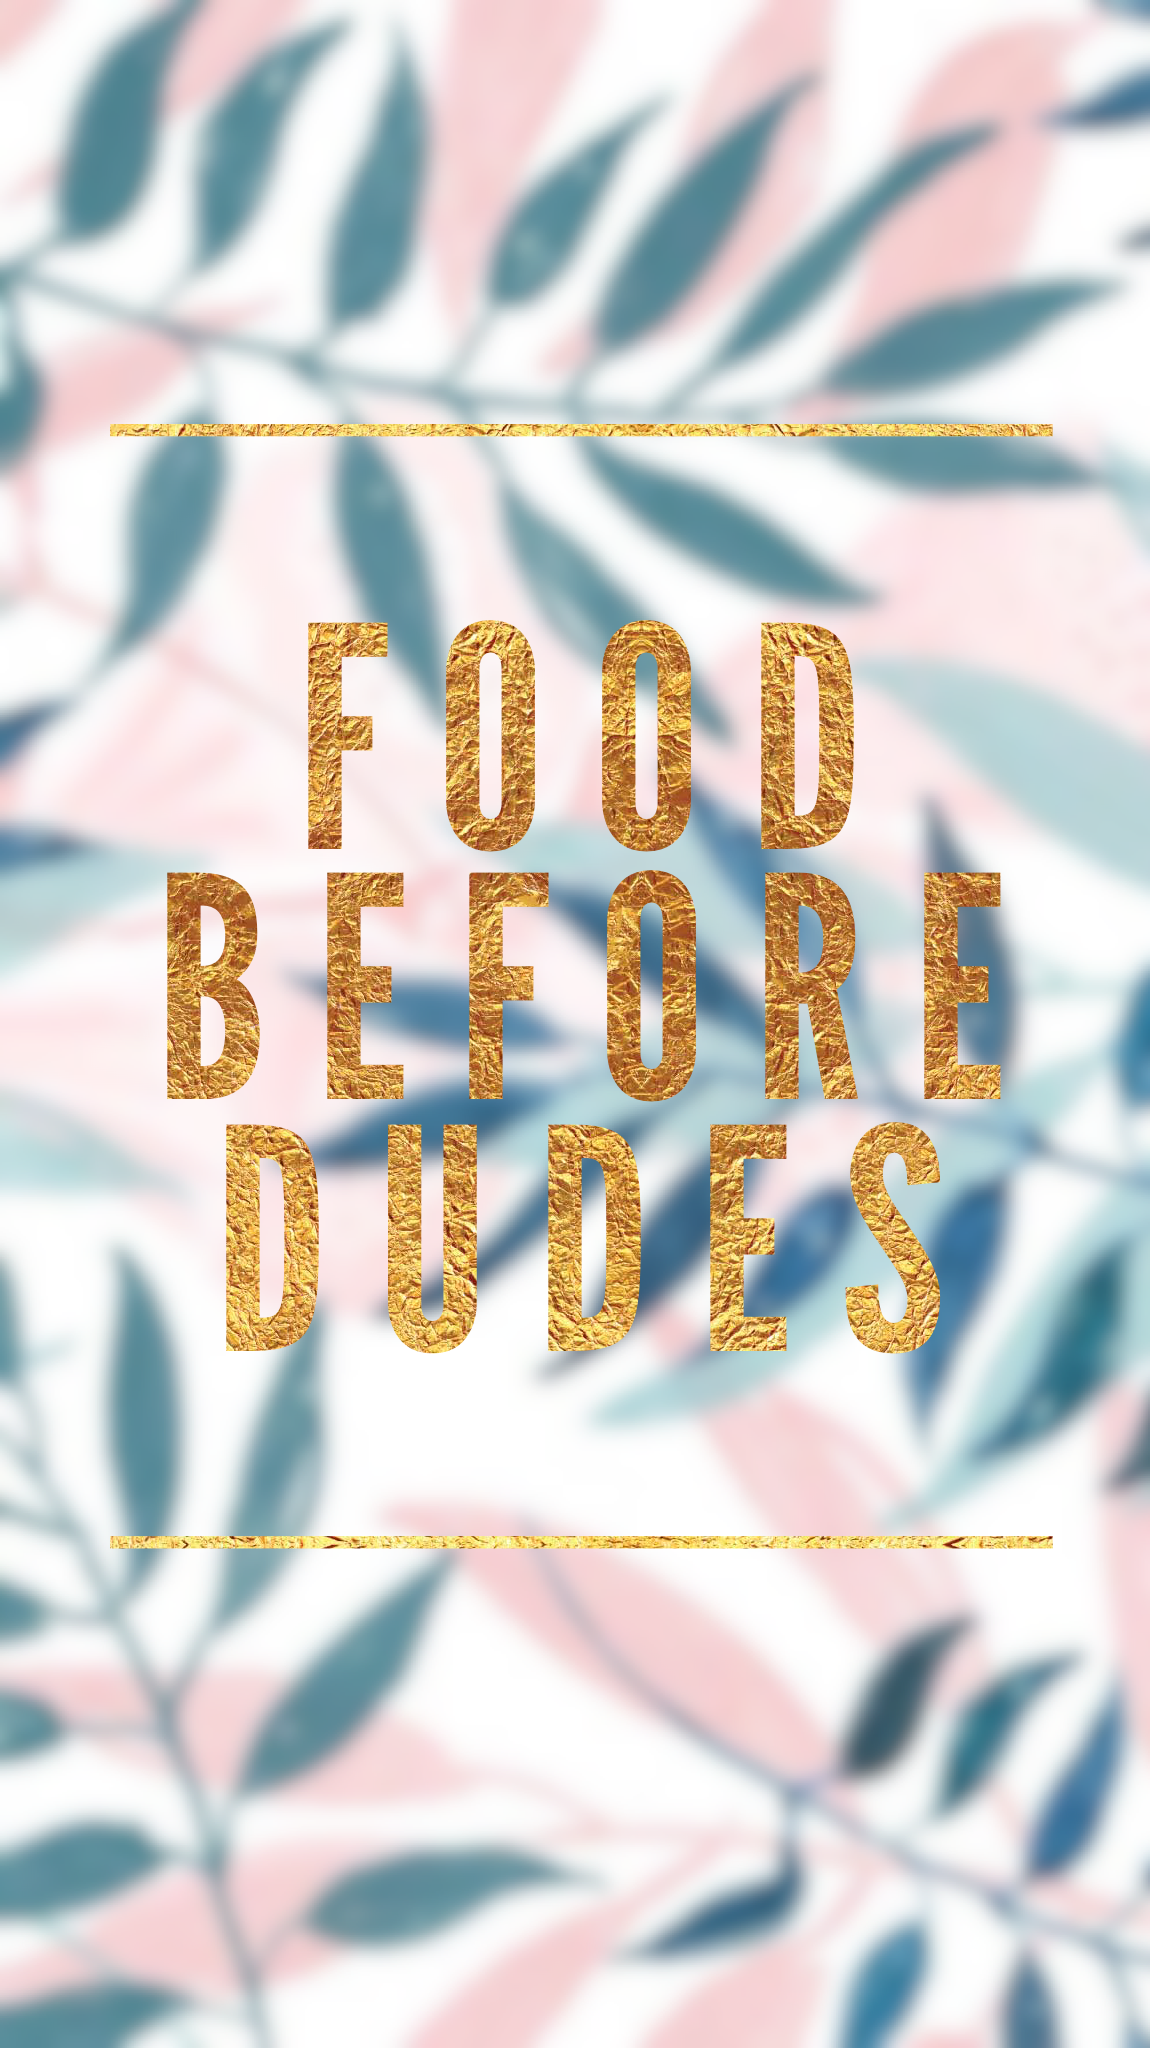 Quotes wallpaper food dudes blurry gold. Wallpaper quotes, Song lyrics wallpaper, Quotes